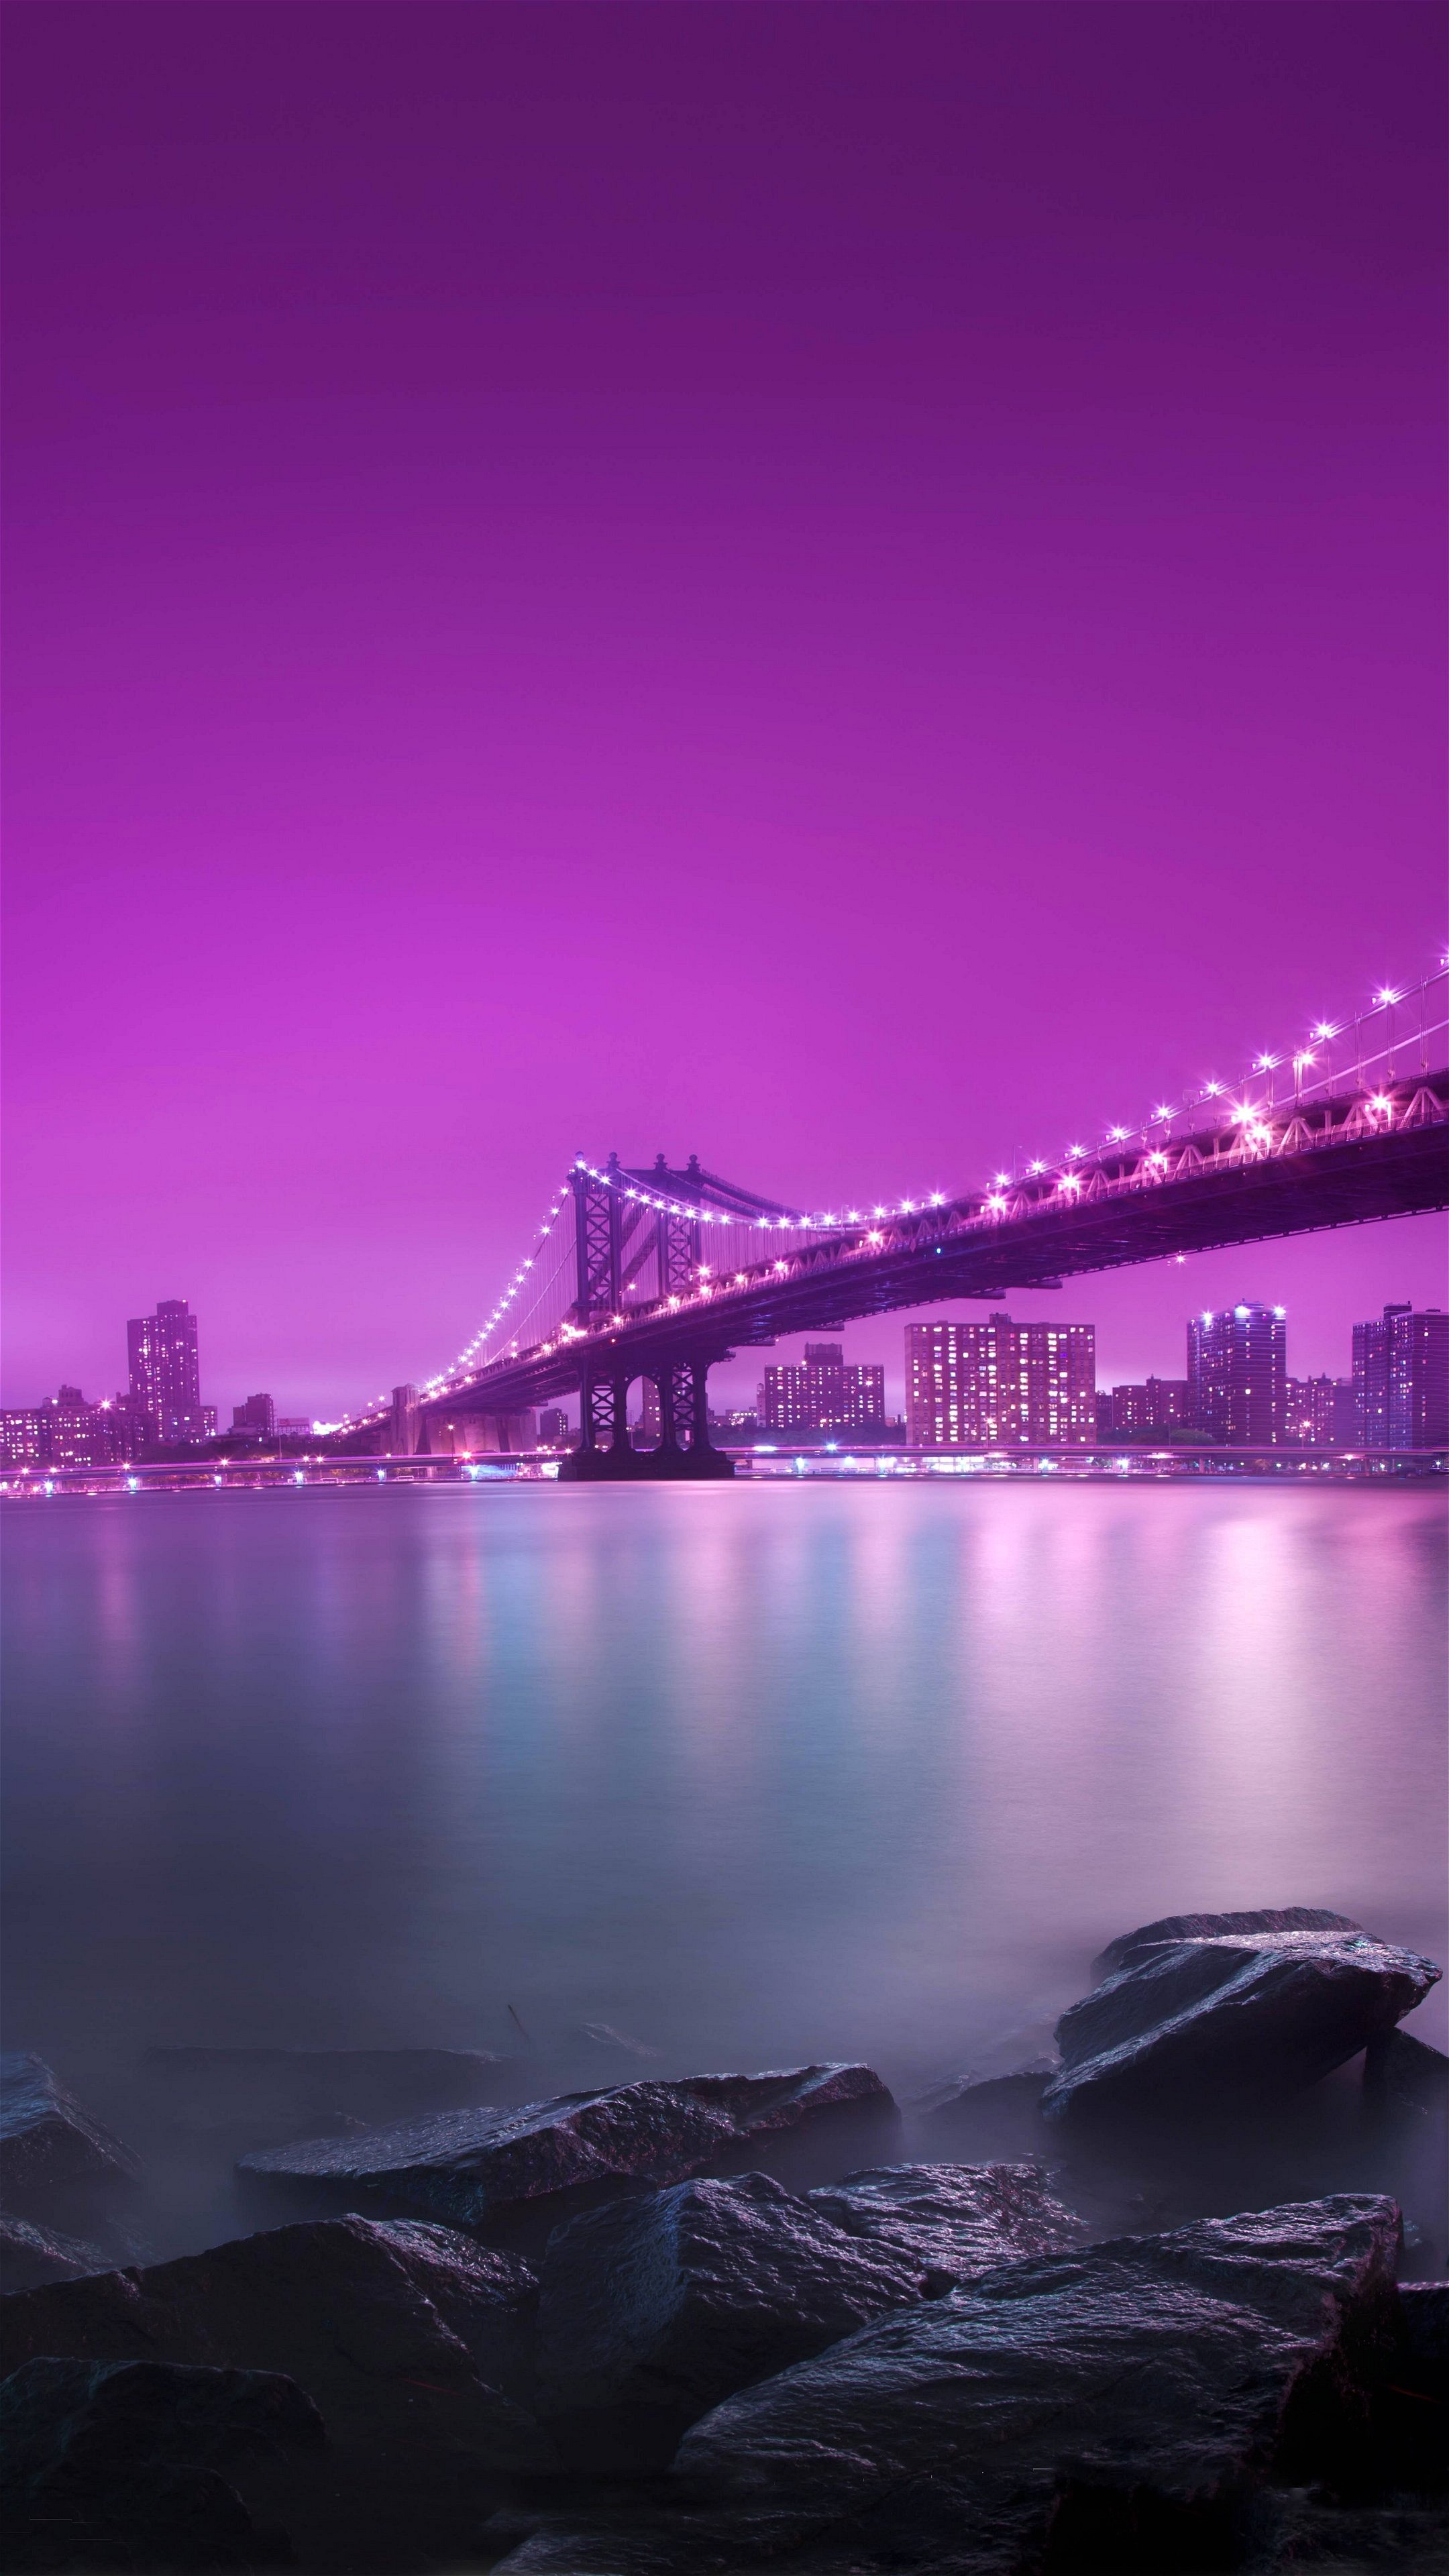 wallpaper for mobile android,cityscape,sky,purple,violet,pink